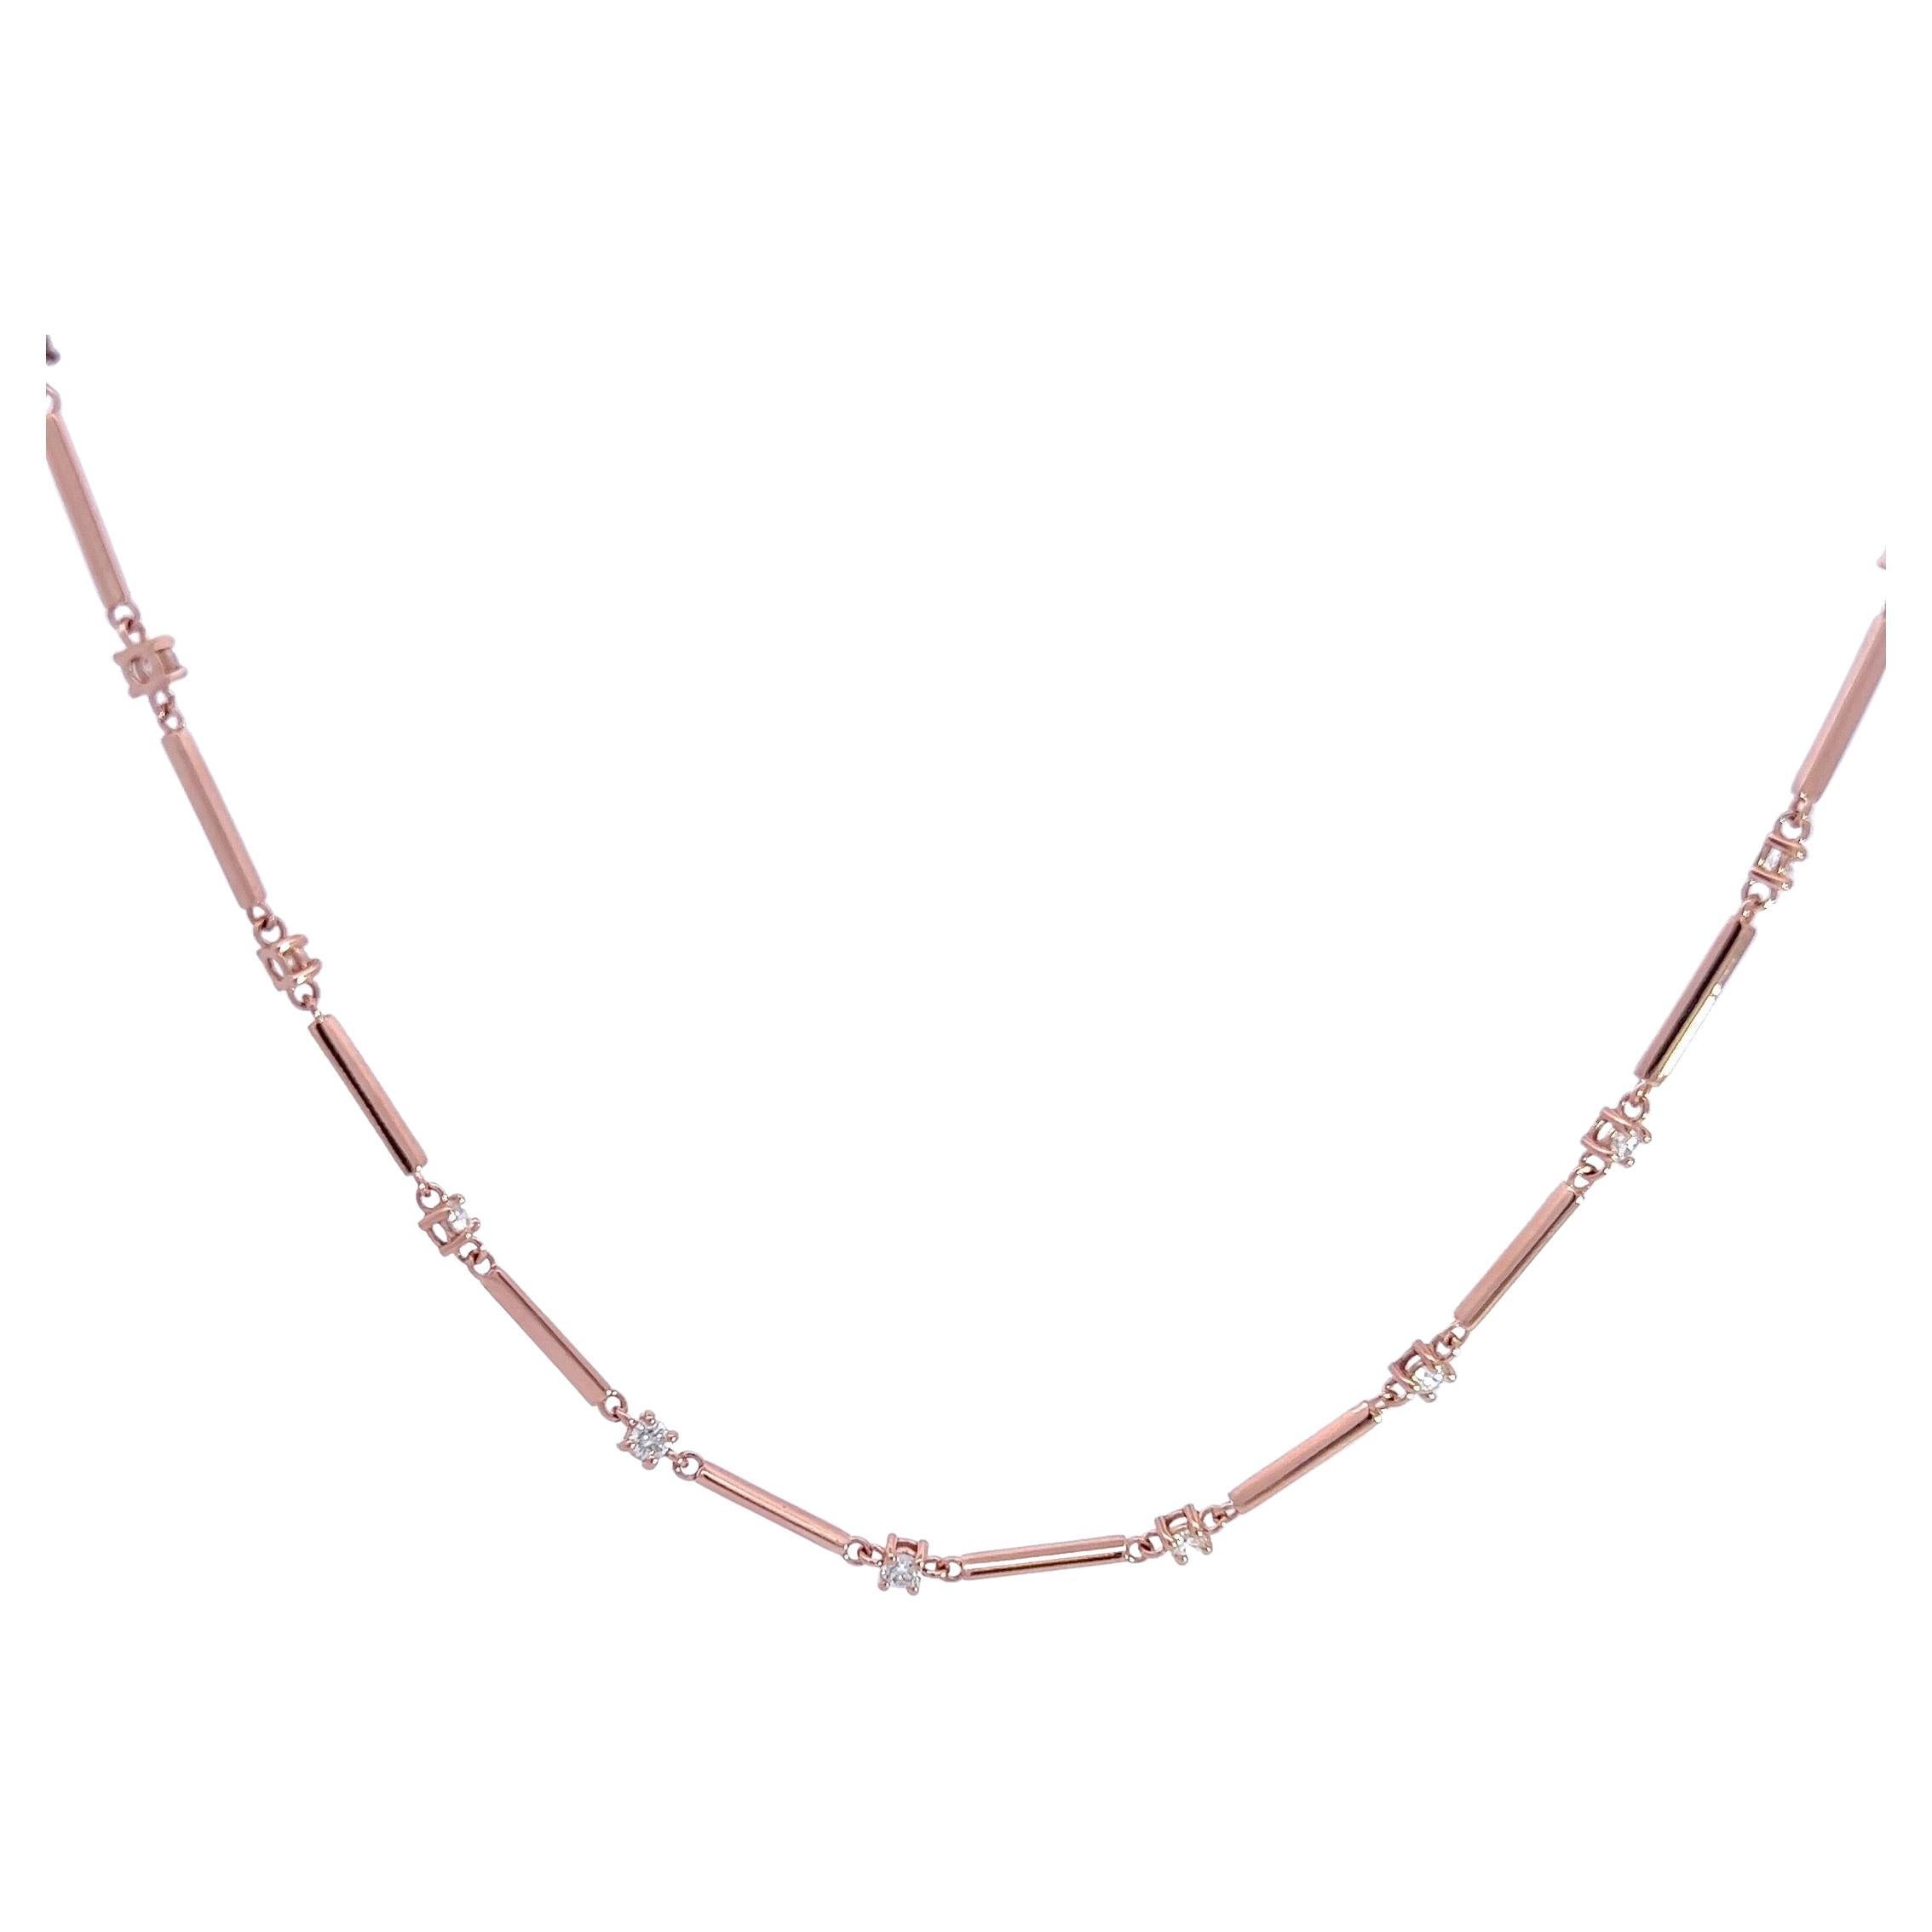 14k Rose Gold Diamonds Necklace with 2.01 Natural Diamonds in a Gold-Bar Chain